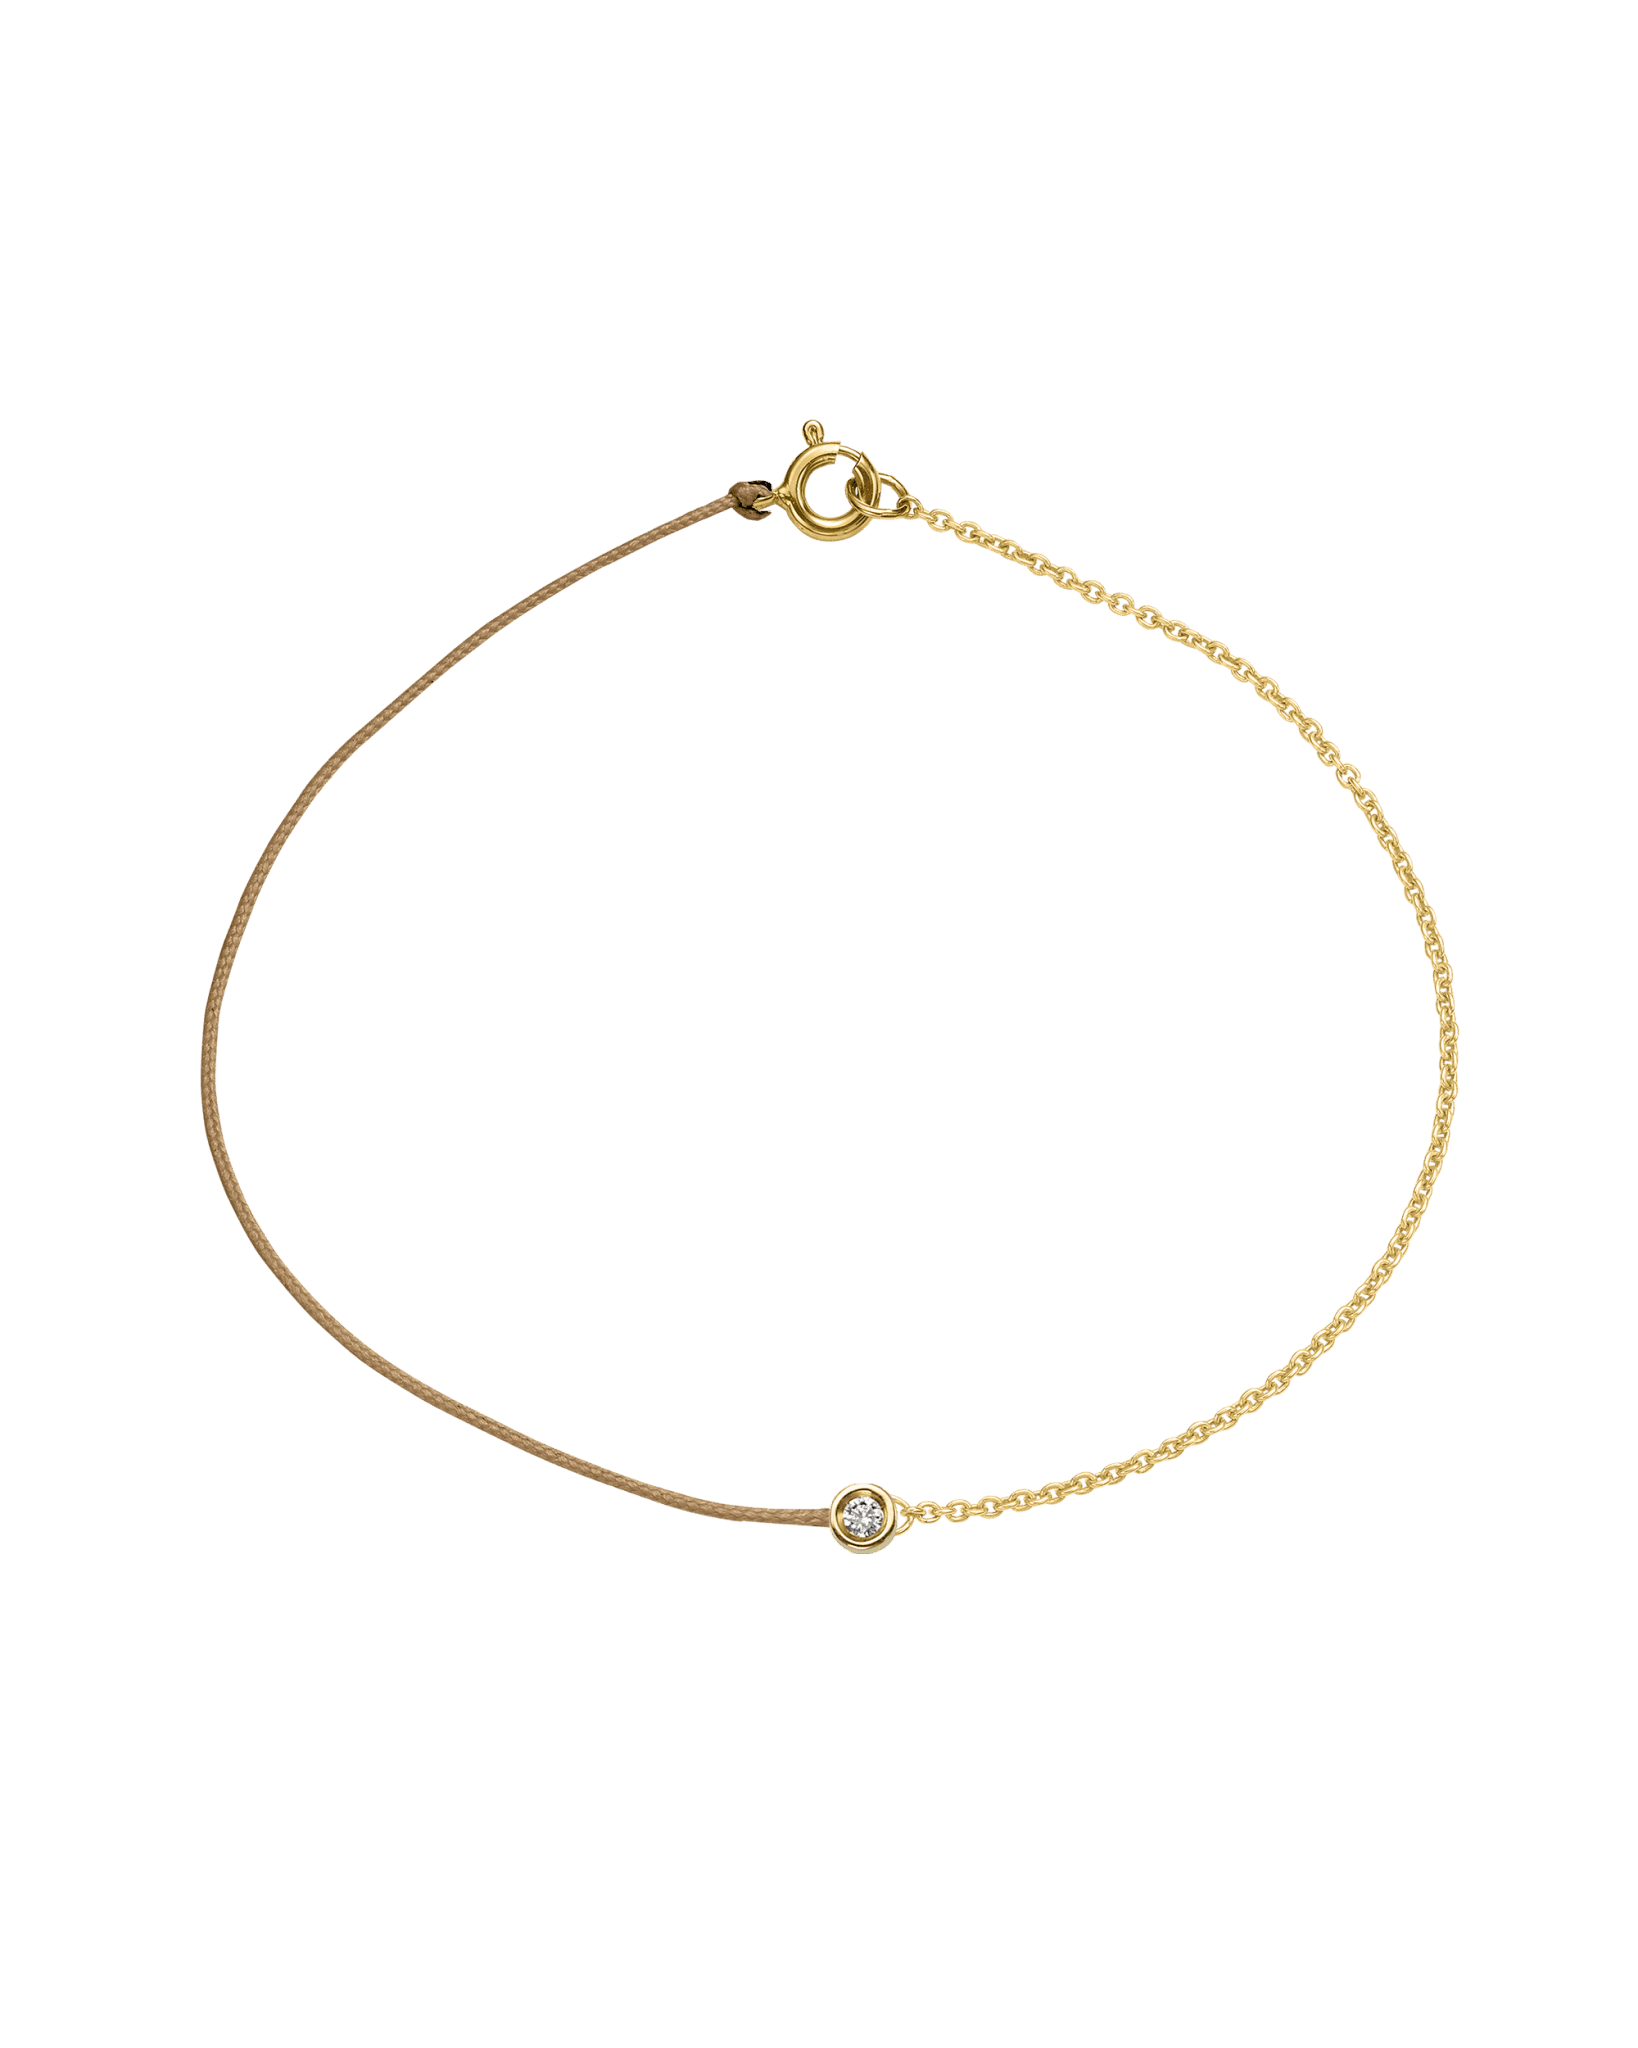 The Half Chain String of Love - 14K Yellow Gold Bracelet 14K Solid Gold Camel Small: 0.03ct Small 6 Inches